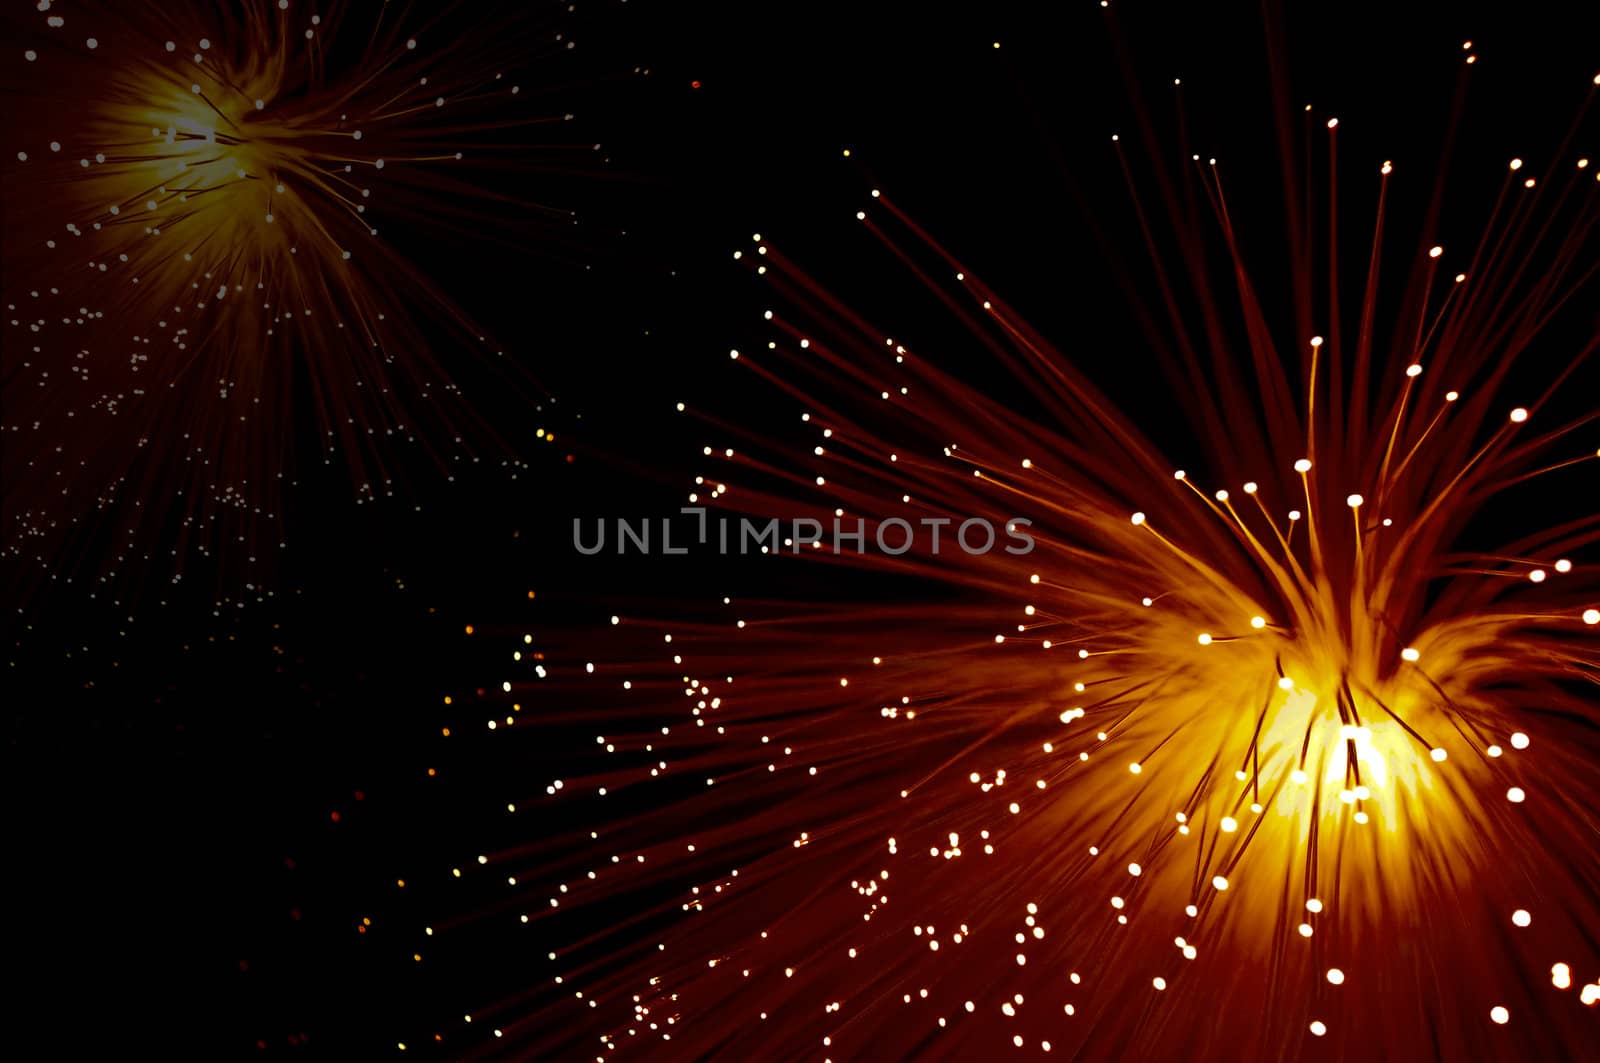 Close up capturing two vibrant orange and red coloured fibre optic lamps illuminated against a black background.